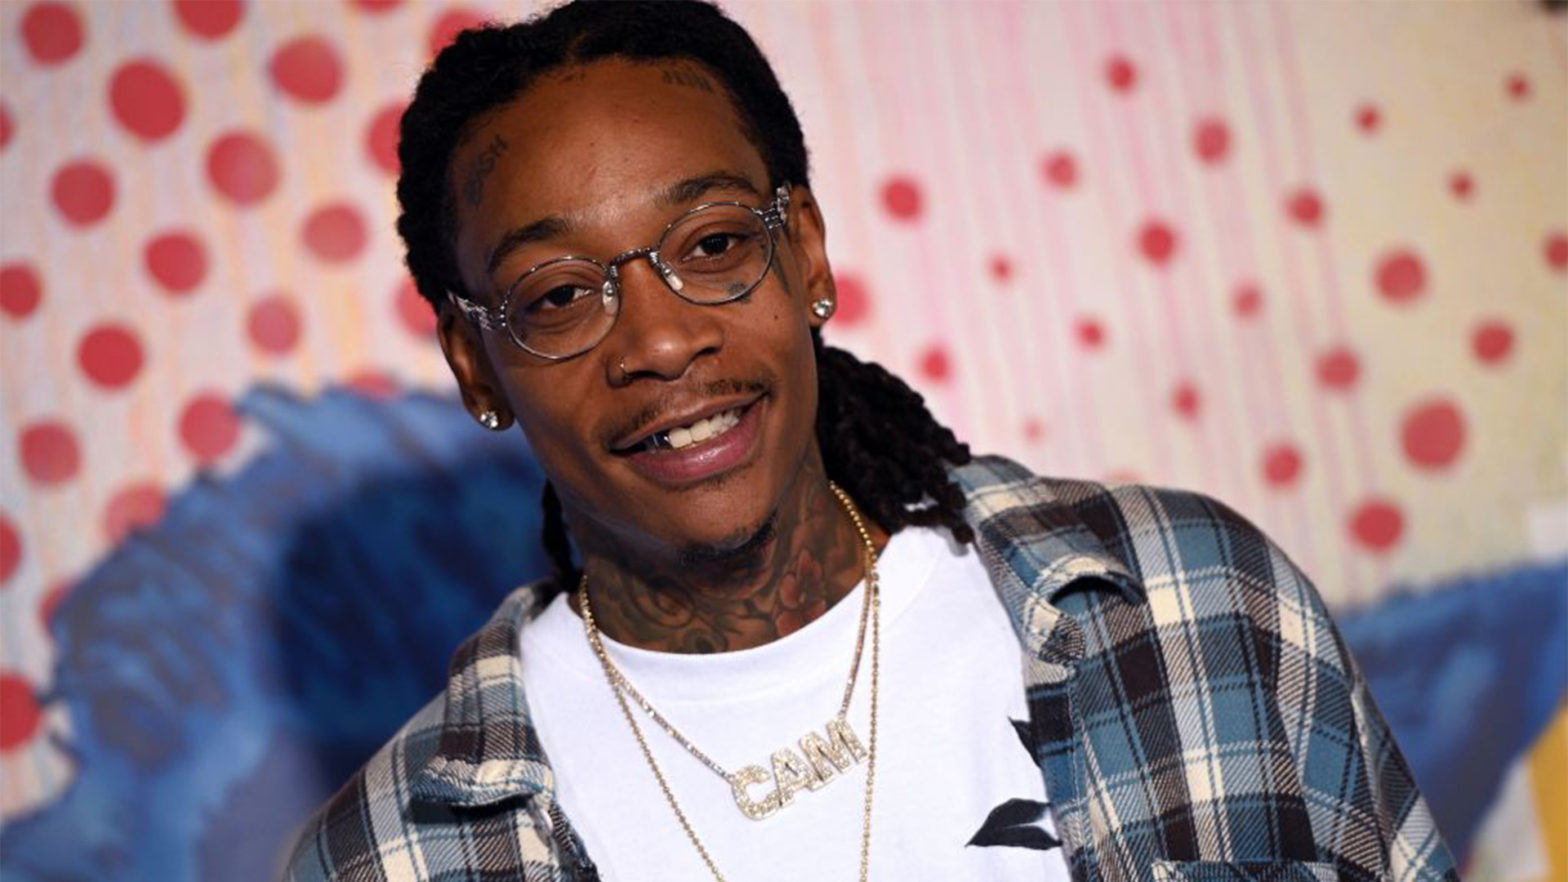 Wiz Khalifa Signs 25 College Athletes To NIL Deals Under His Taylor Gang Entertainment